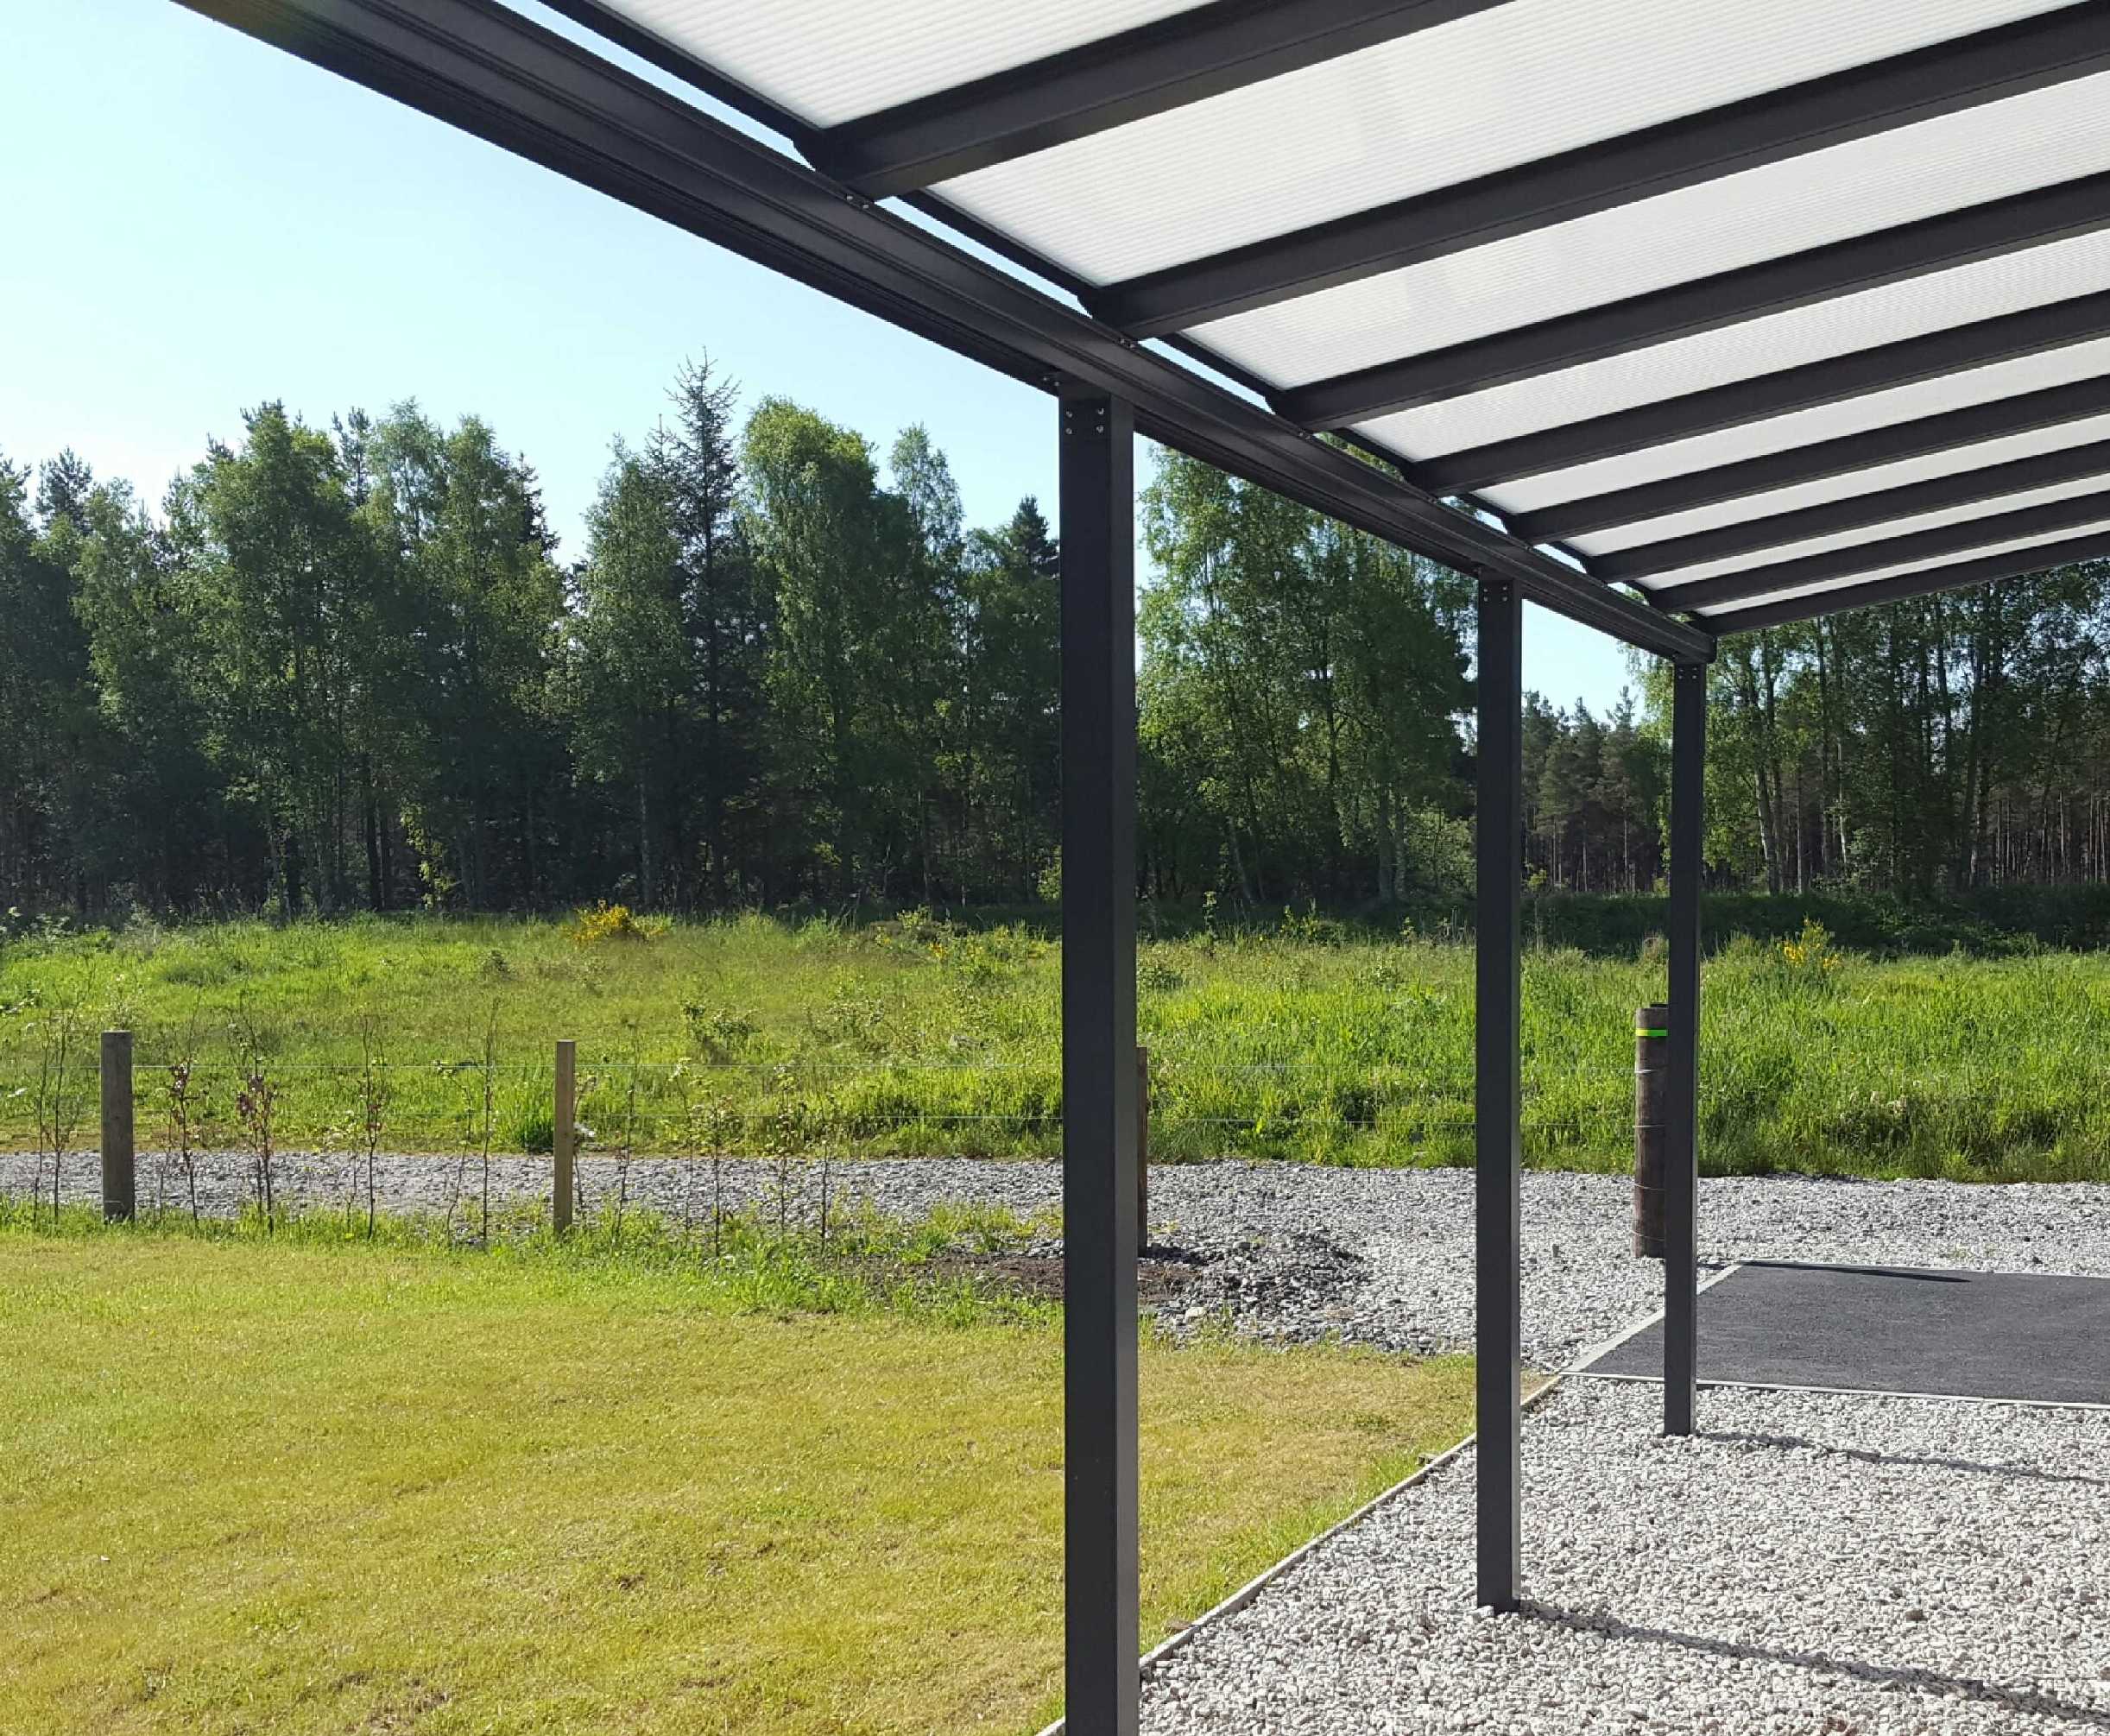 SPECIAL OFFER Omega Smart Lean-To Canopy, Anthracite Grey, 16mm Polycarbonate Glazing - 2.5m (W) x 1.5m (P), (2) Supporting Posts